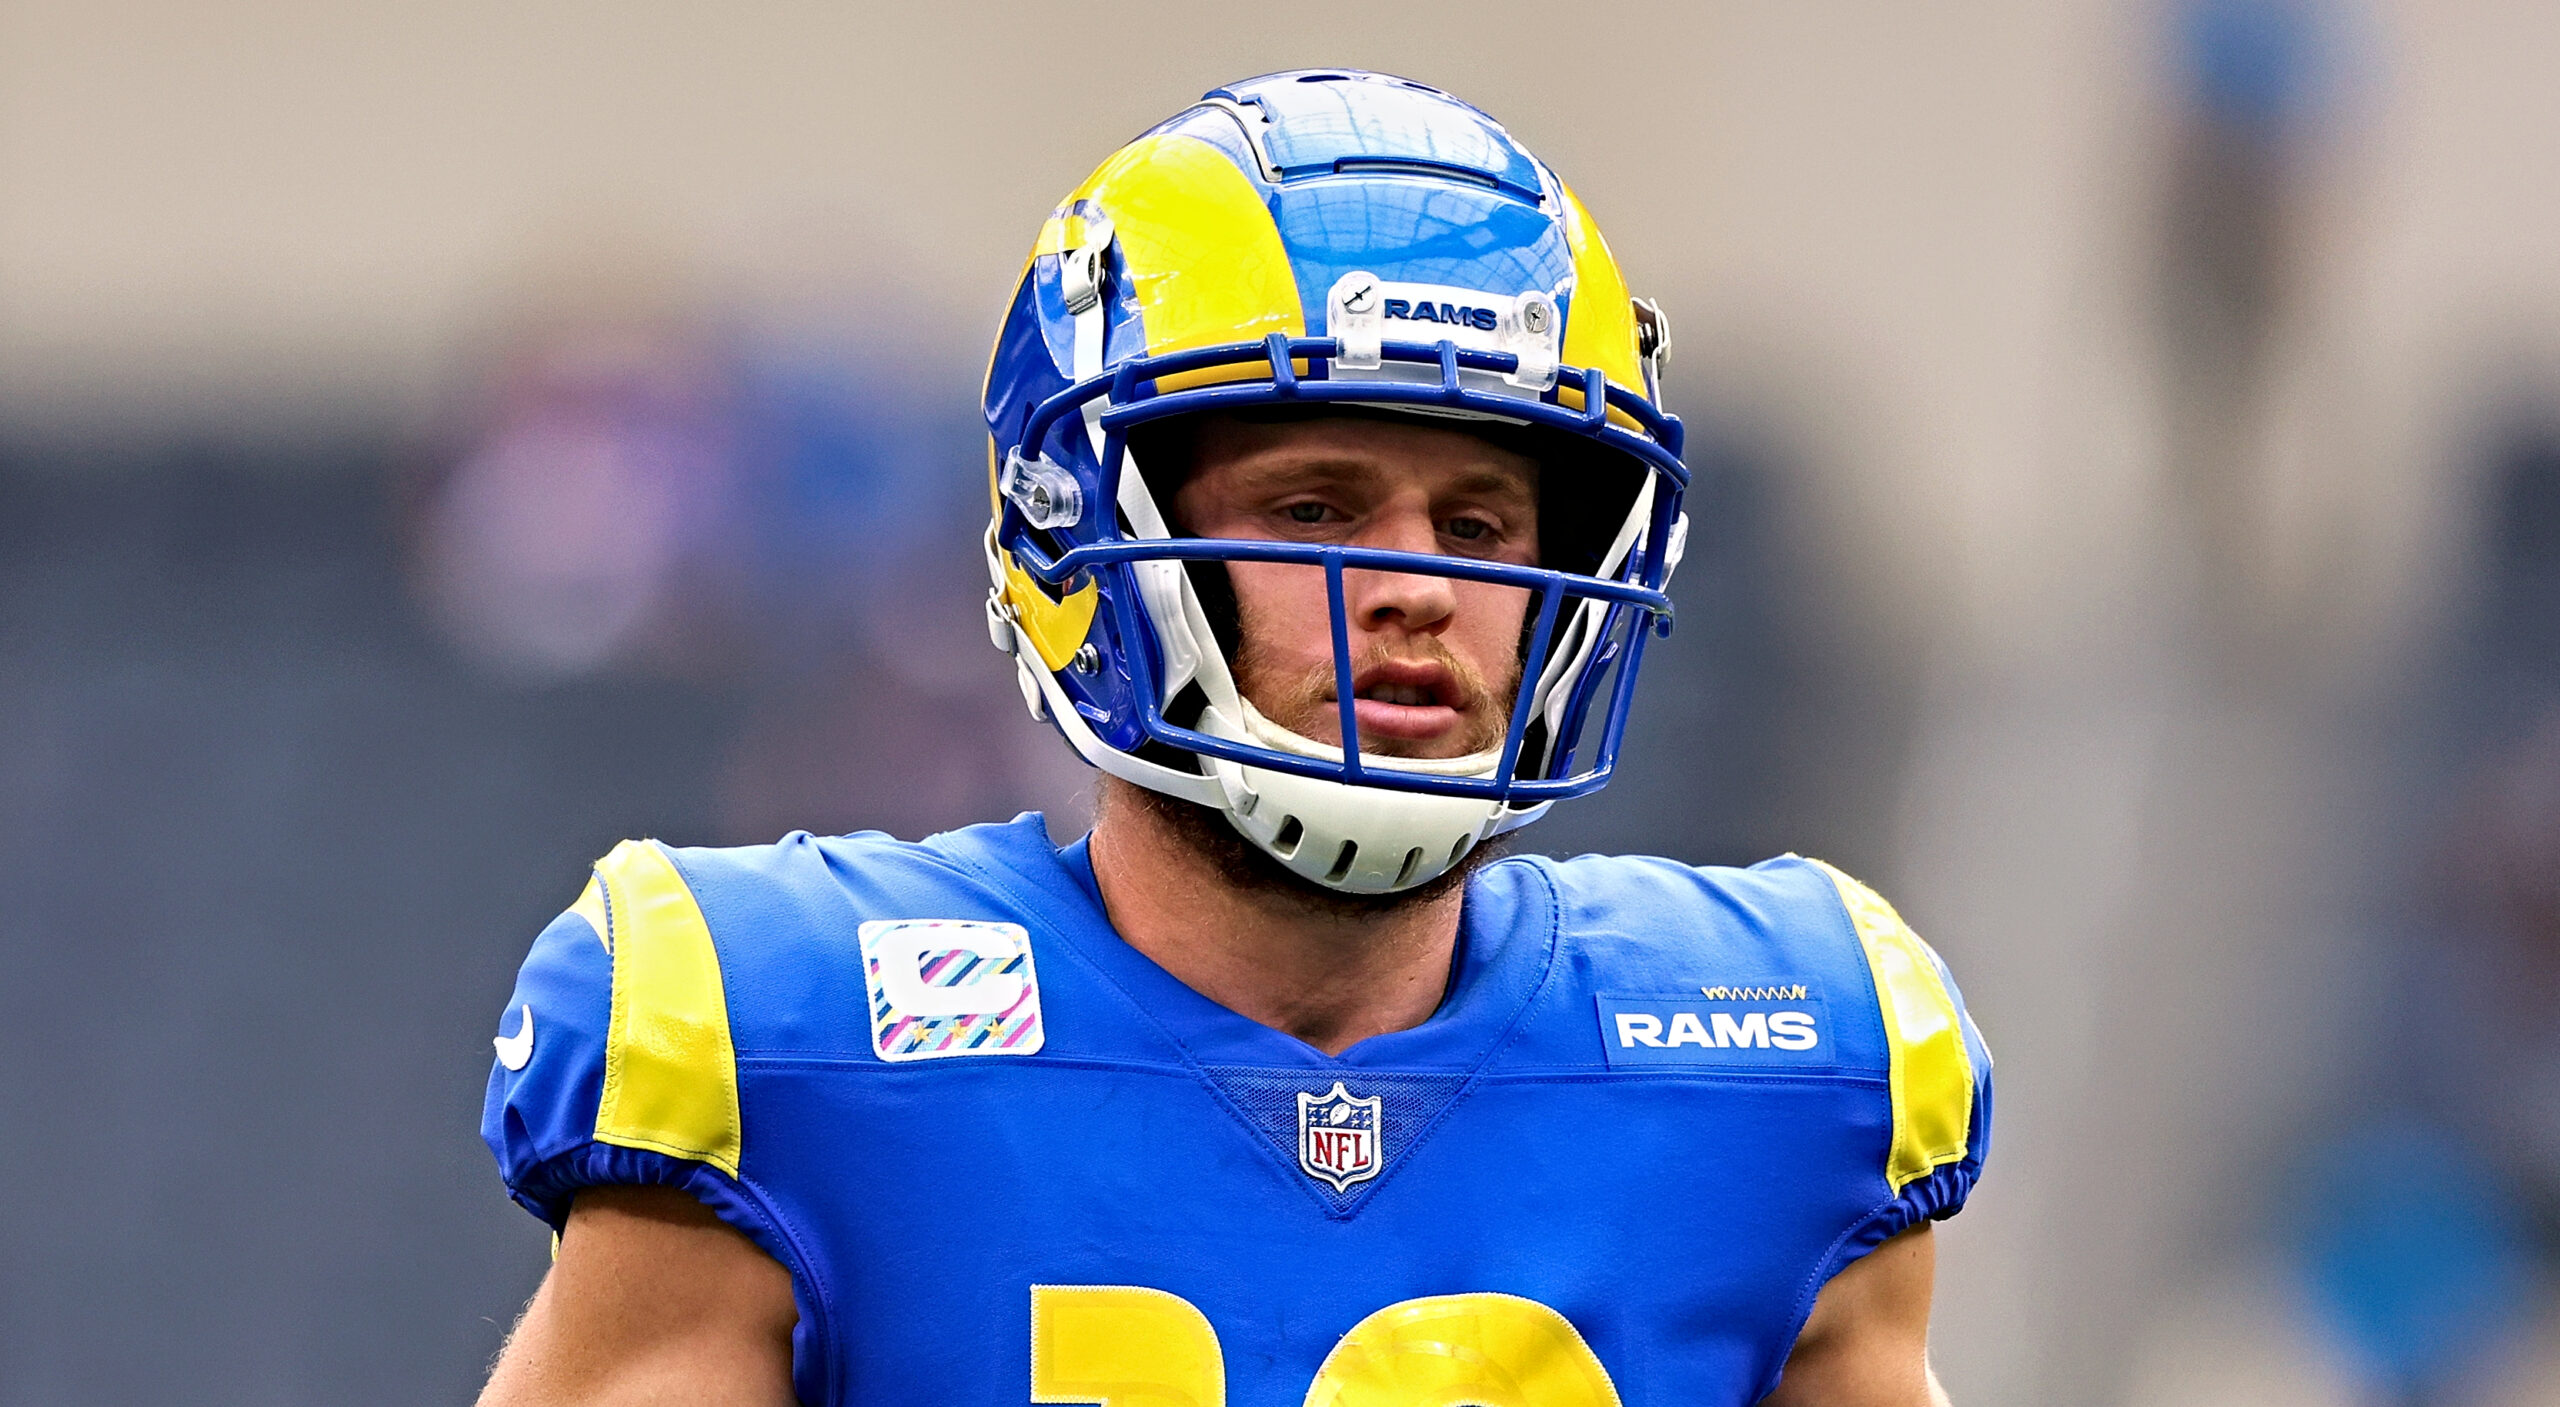 Rams Send Cooper Kupp To Surprice NFC Team In Trade Proposal